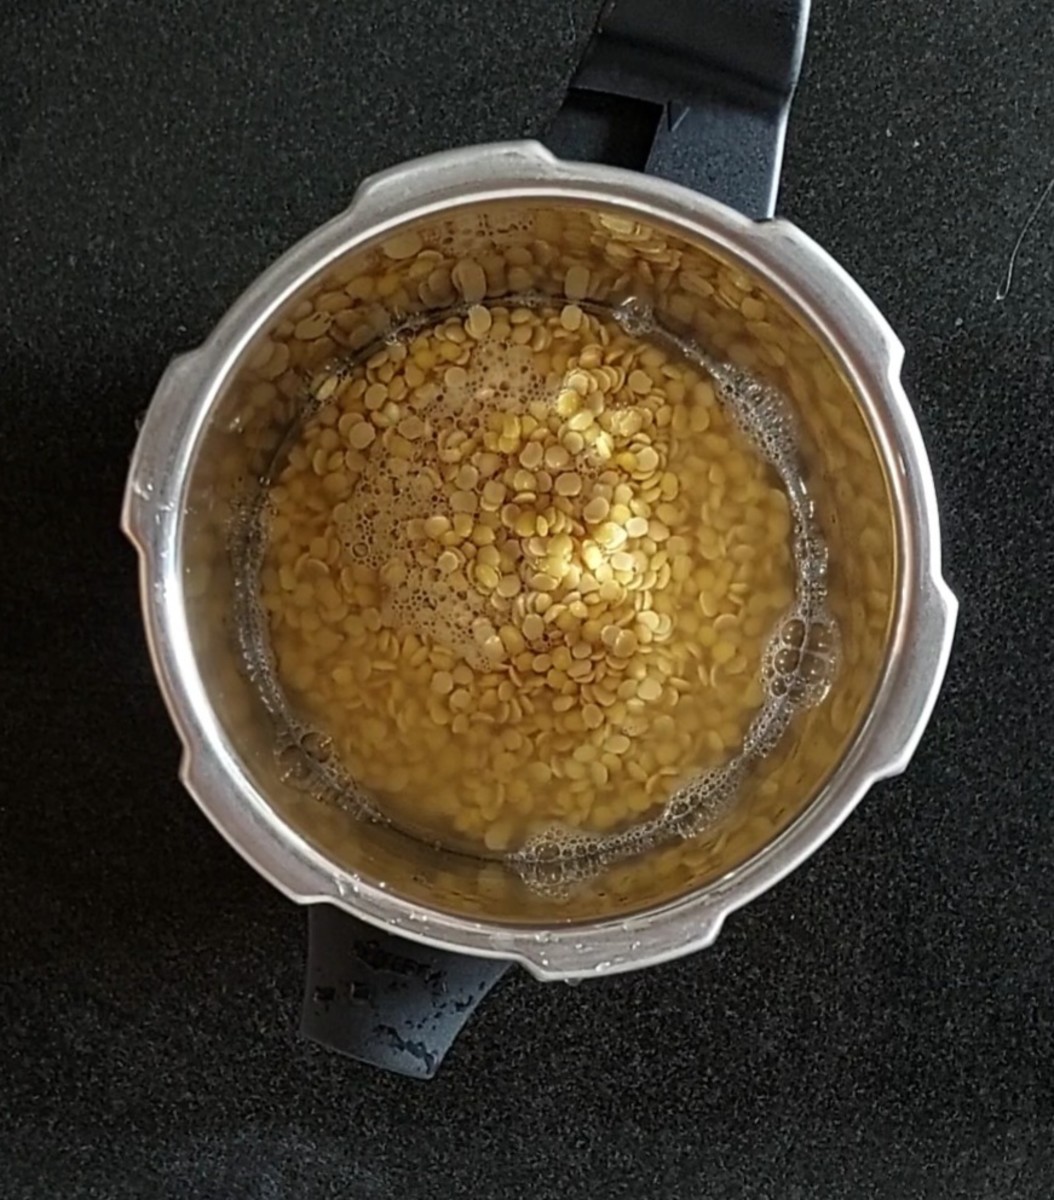 Transfer soaked toor dal to a cooker (along with soaking water), add 1/2 tablespoon oil, close the lid and take 3 whistles or till dal is cooked well. Let the pressure of the cooker subsides on its own.